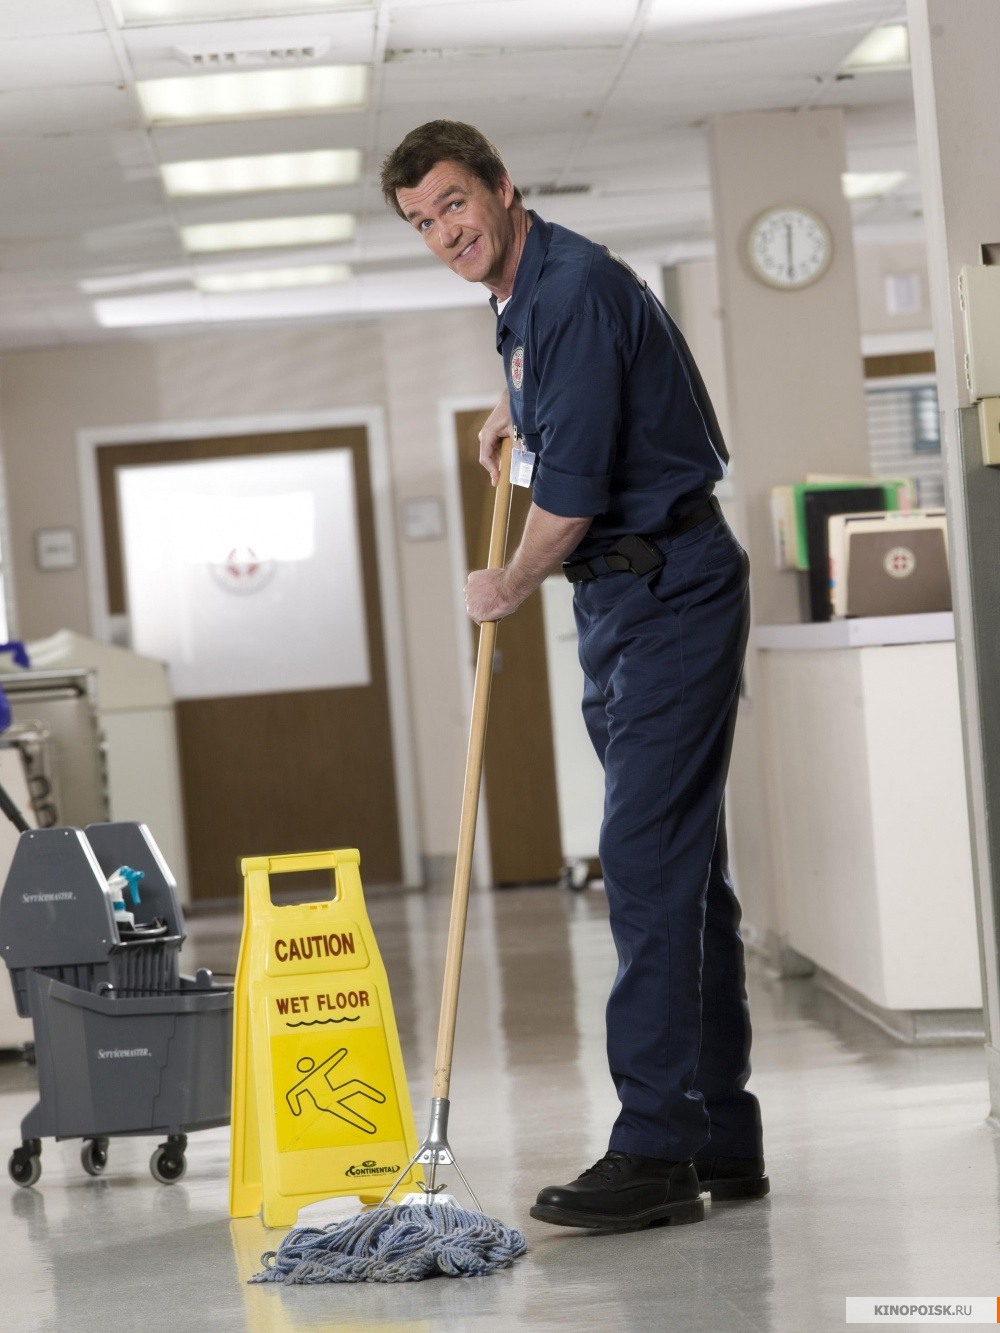 The-Janitor-the-janitor-30795825-1000-1333.jpg